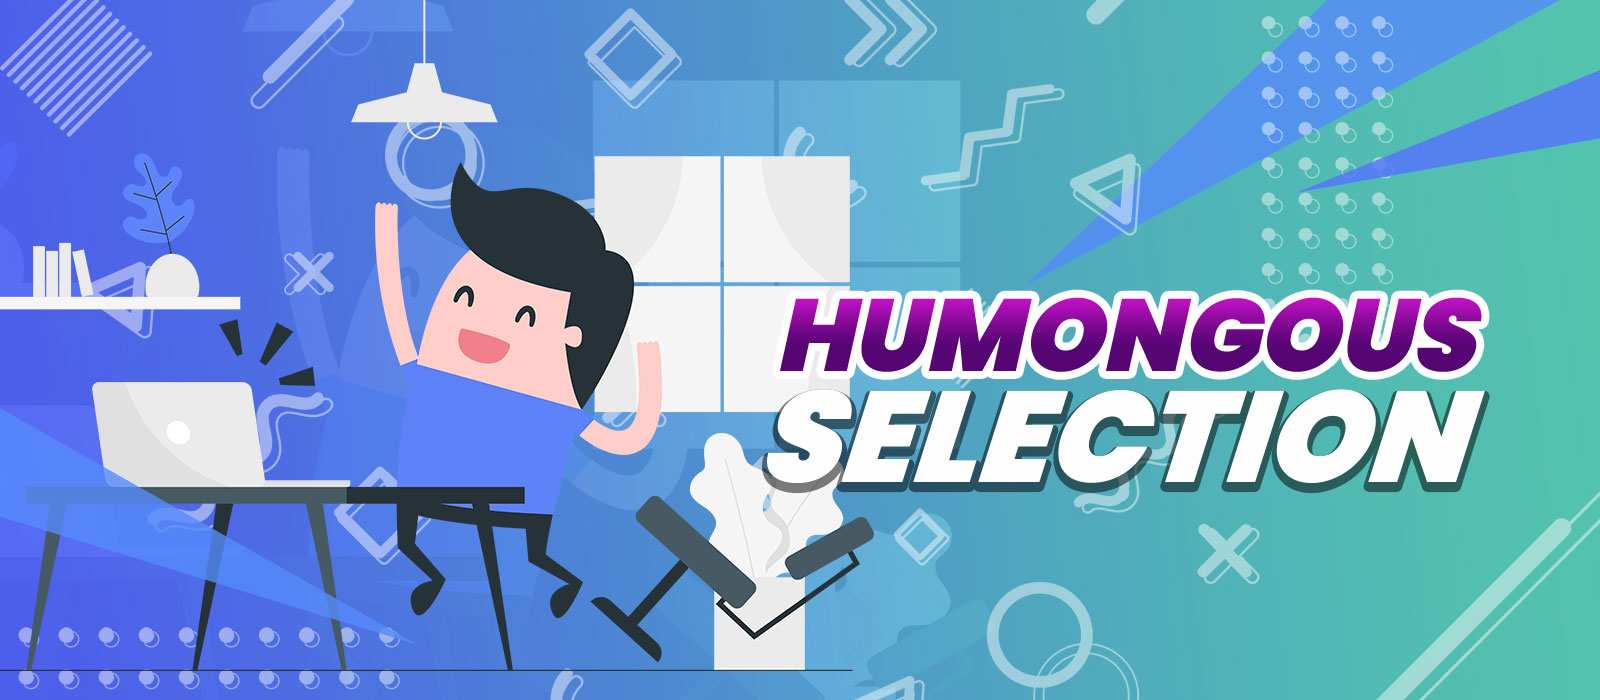 FE HumongousSelection Power Slide Review: The Ultimate Digital Animation Slides Cloud Library